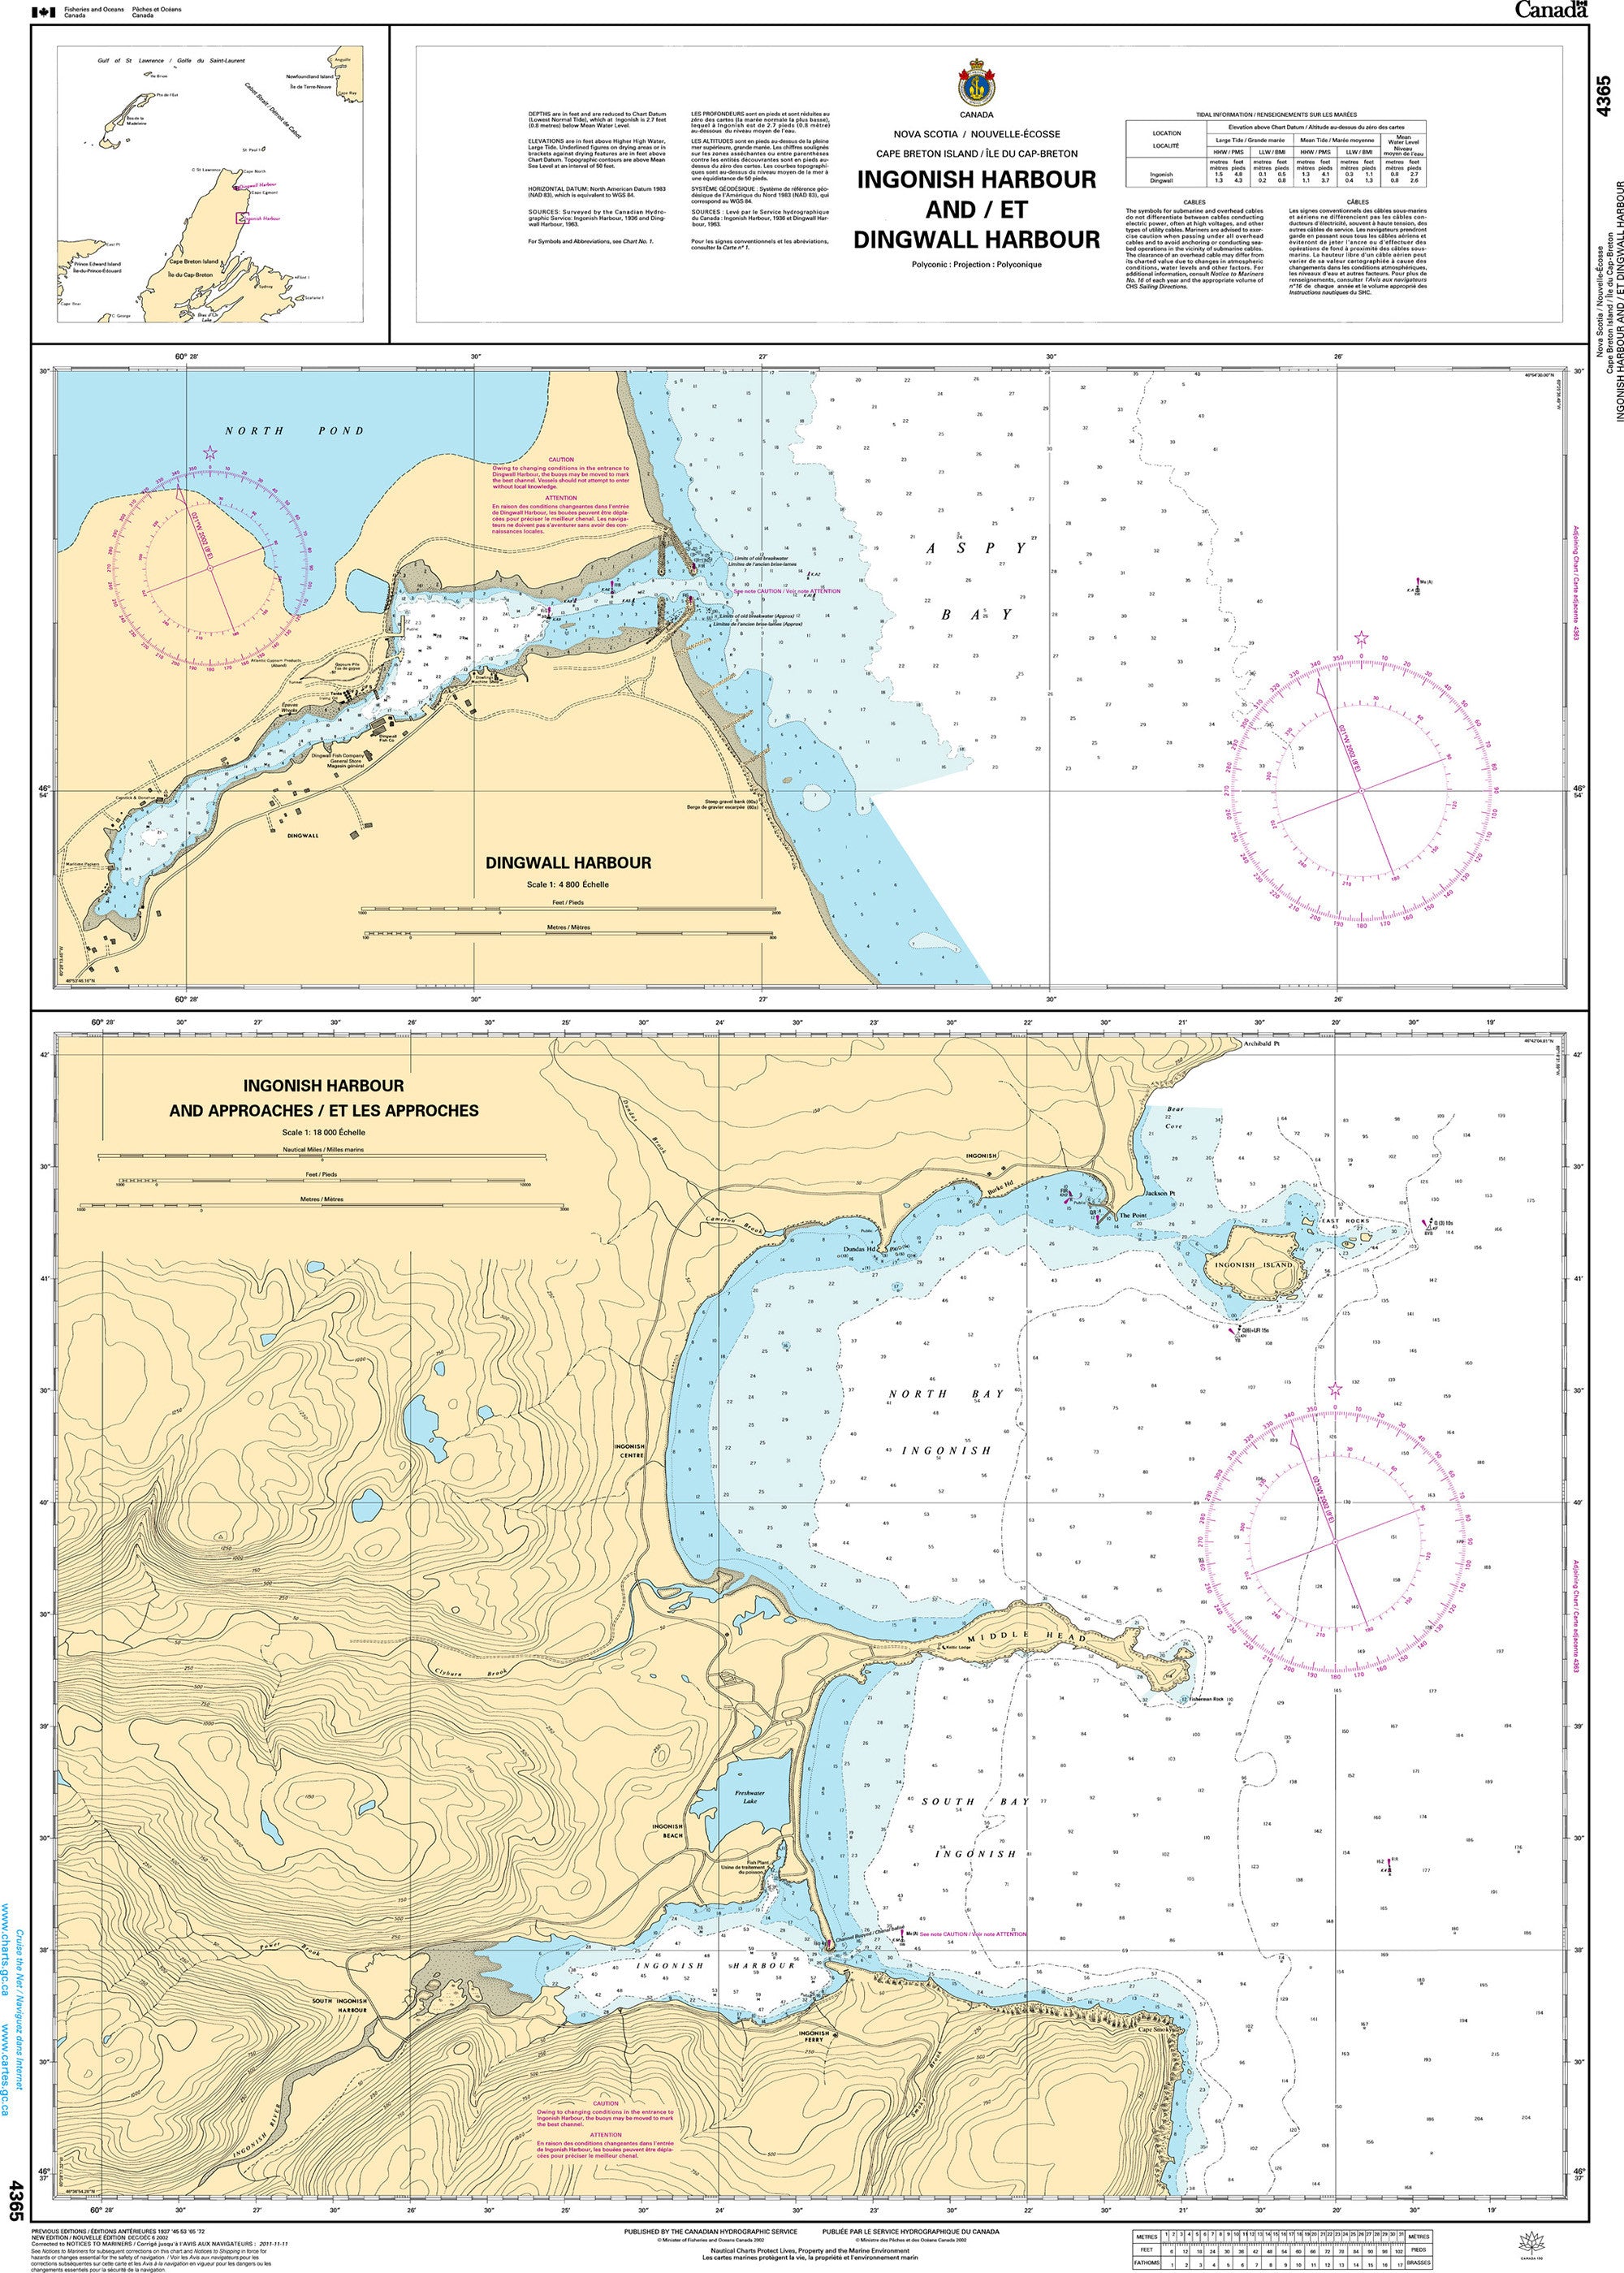 Canadian Hydrographic Service Nautical Chart CHS4365: Ingonish Harbour and/et Dingwall Harbour